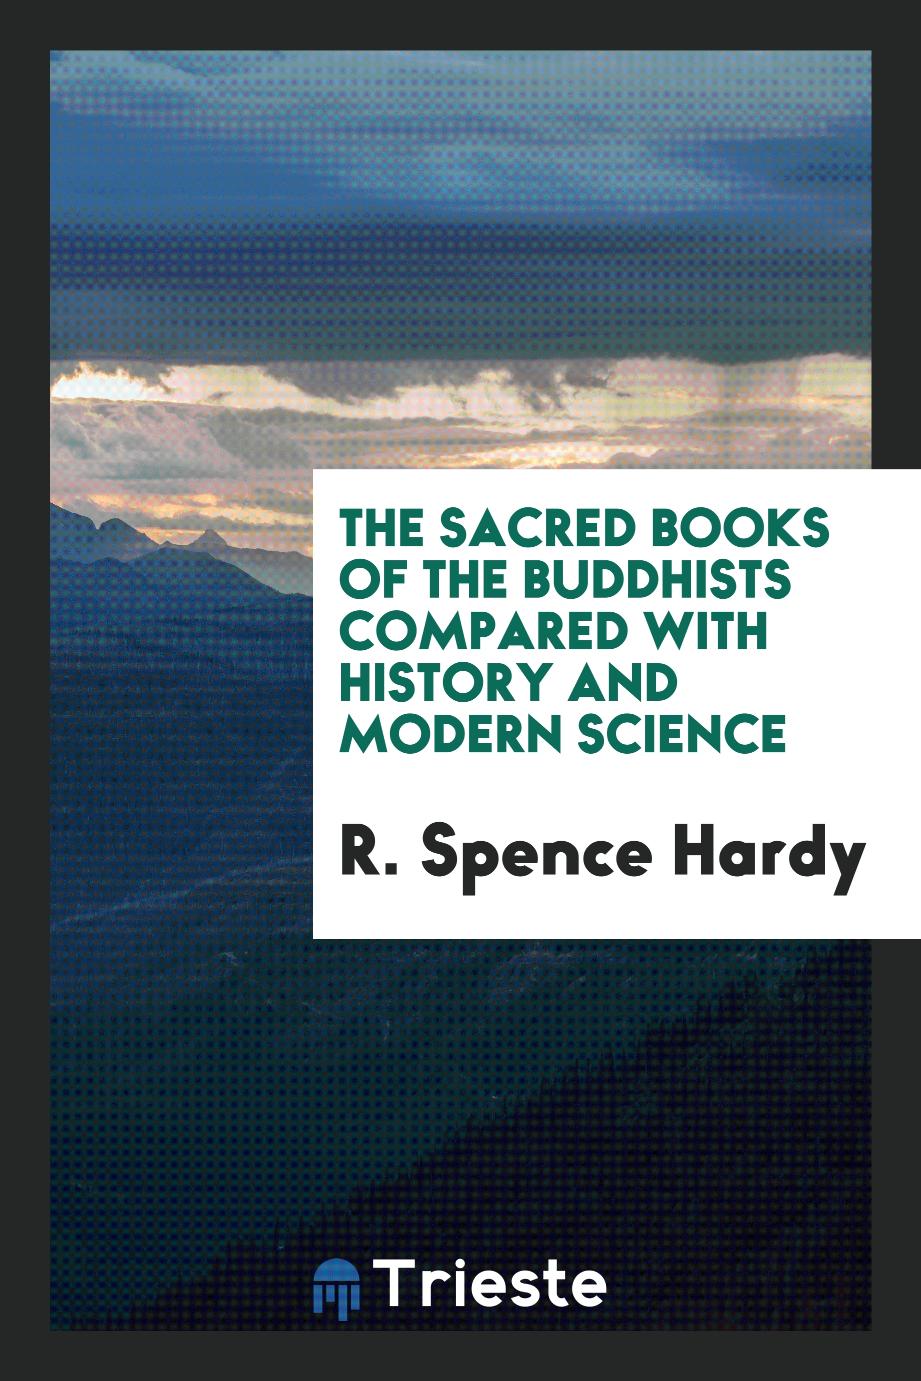 The Sacred Books of the Buddhists Compared with History and Modern Science